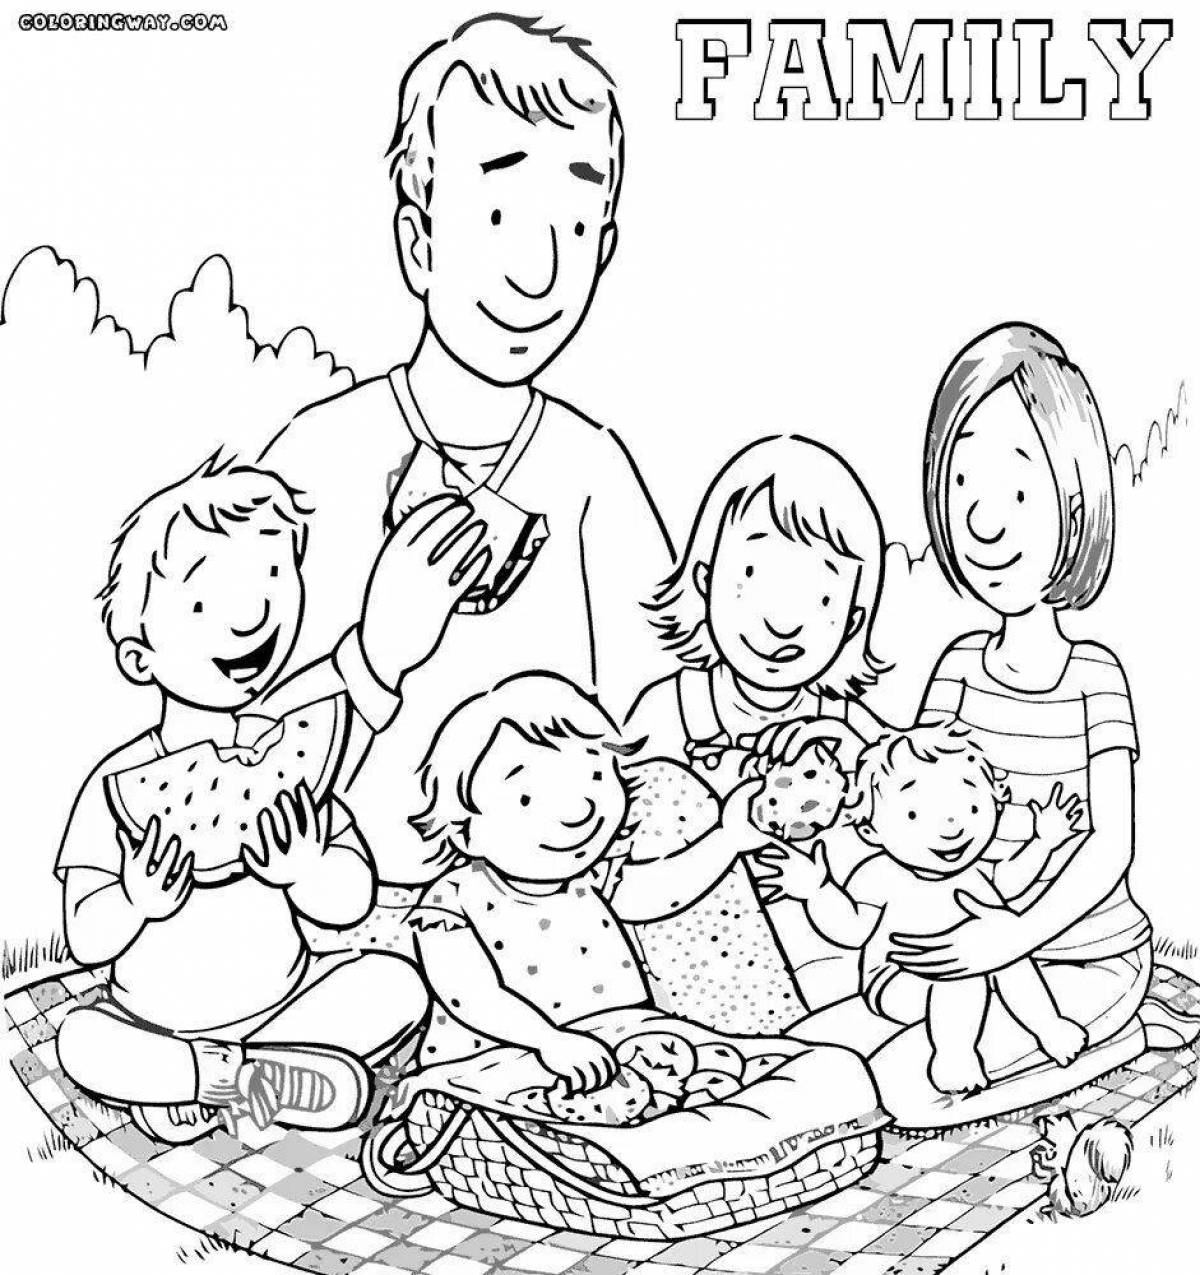 Delightful coloring book family of 4